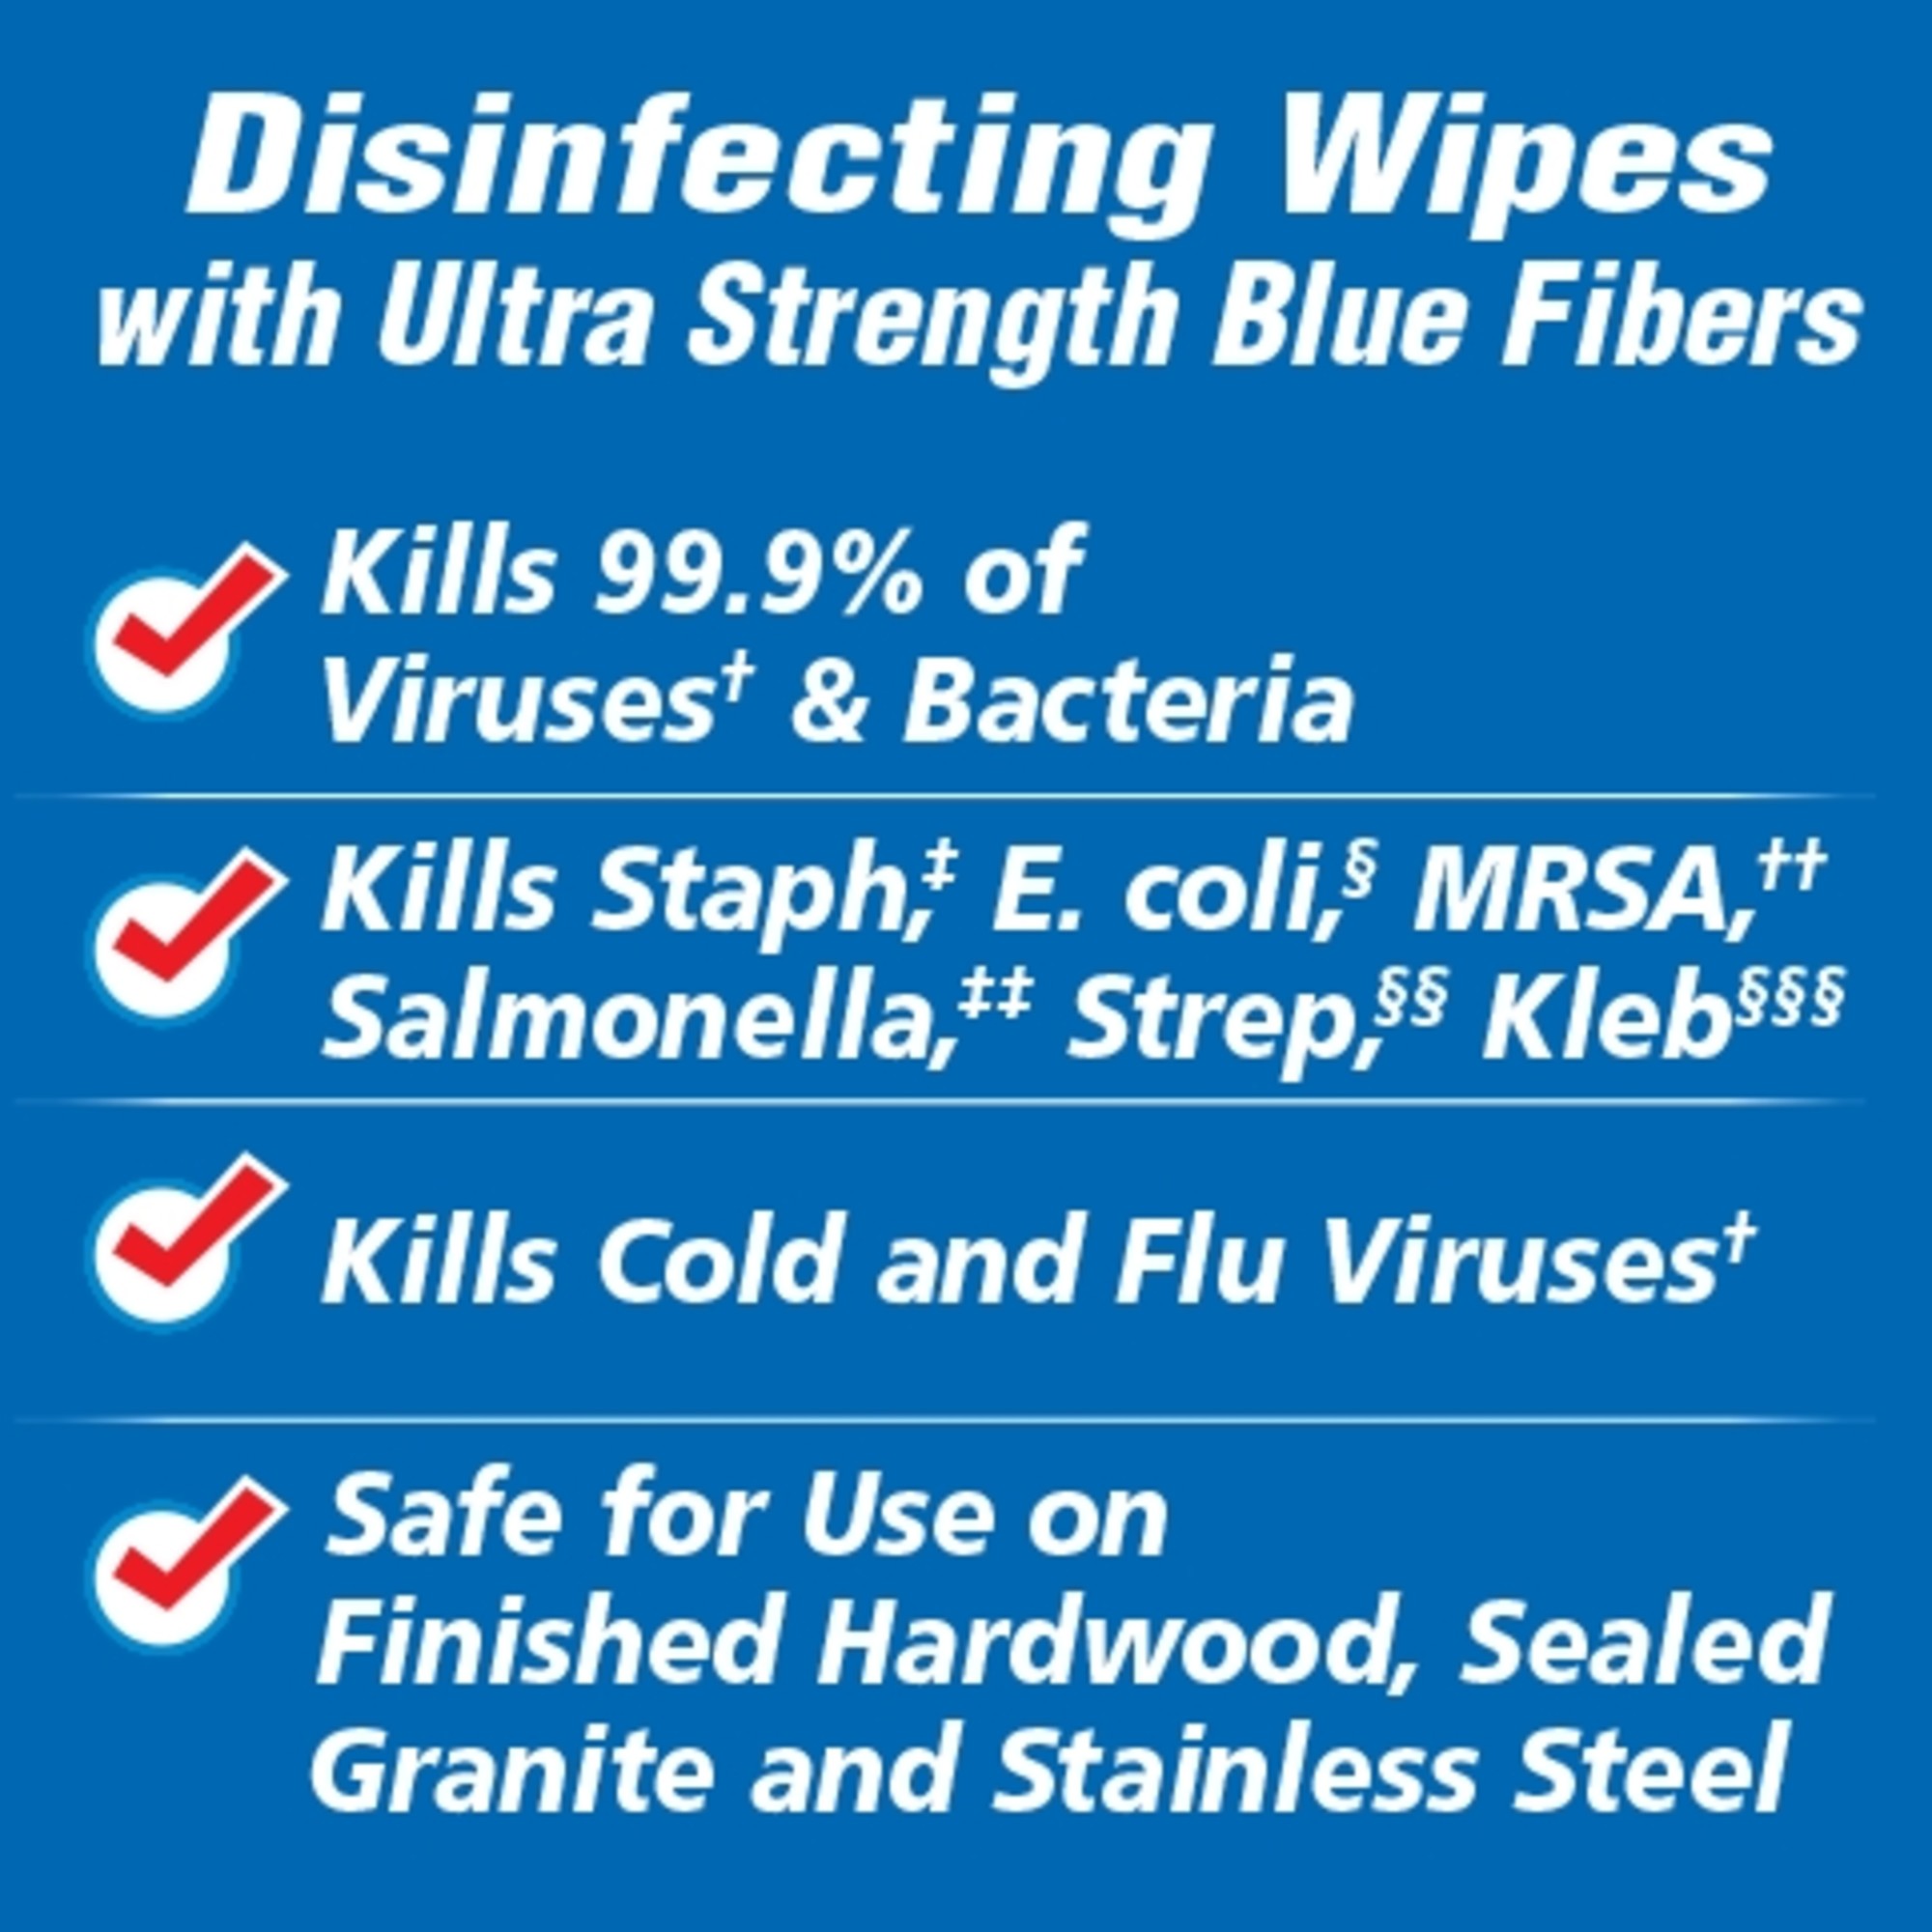 Clorox Disinfecting Wipes with Ultra Strength Blue Fibers, Crisp Lemon - 1 Canister - 65 Wipes - image 3 of 7